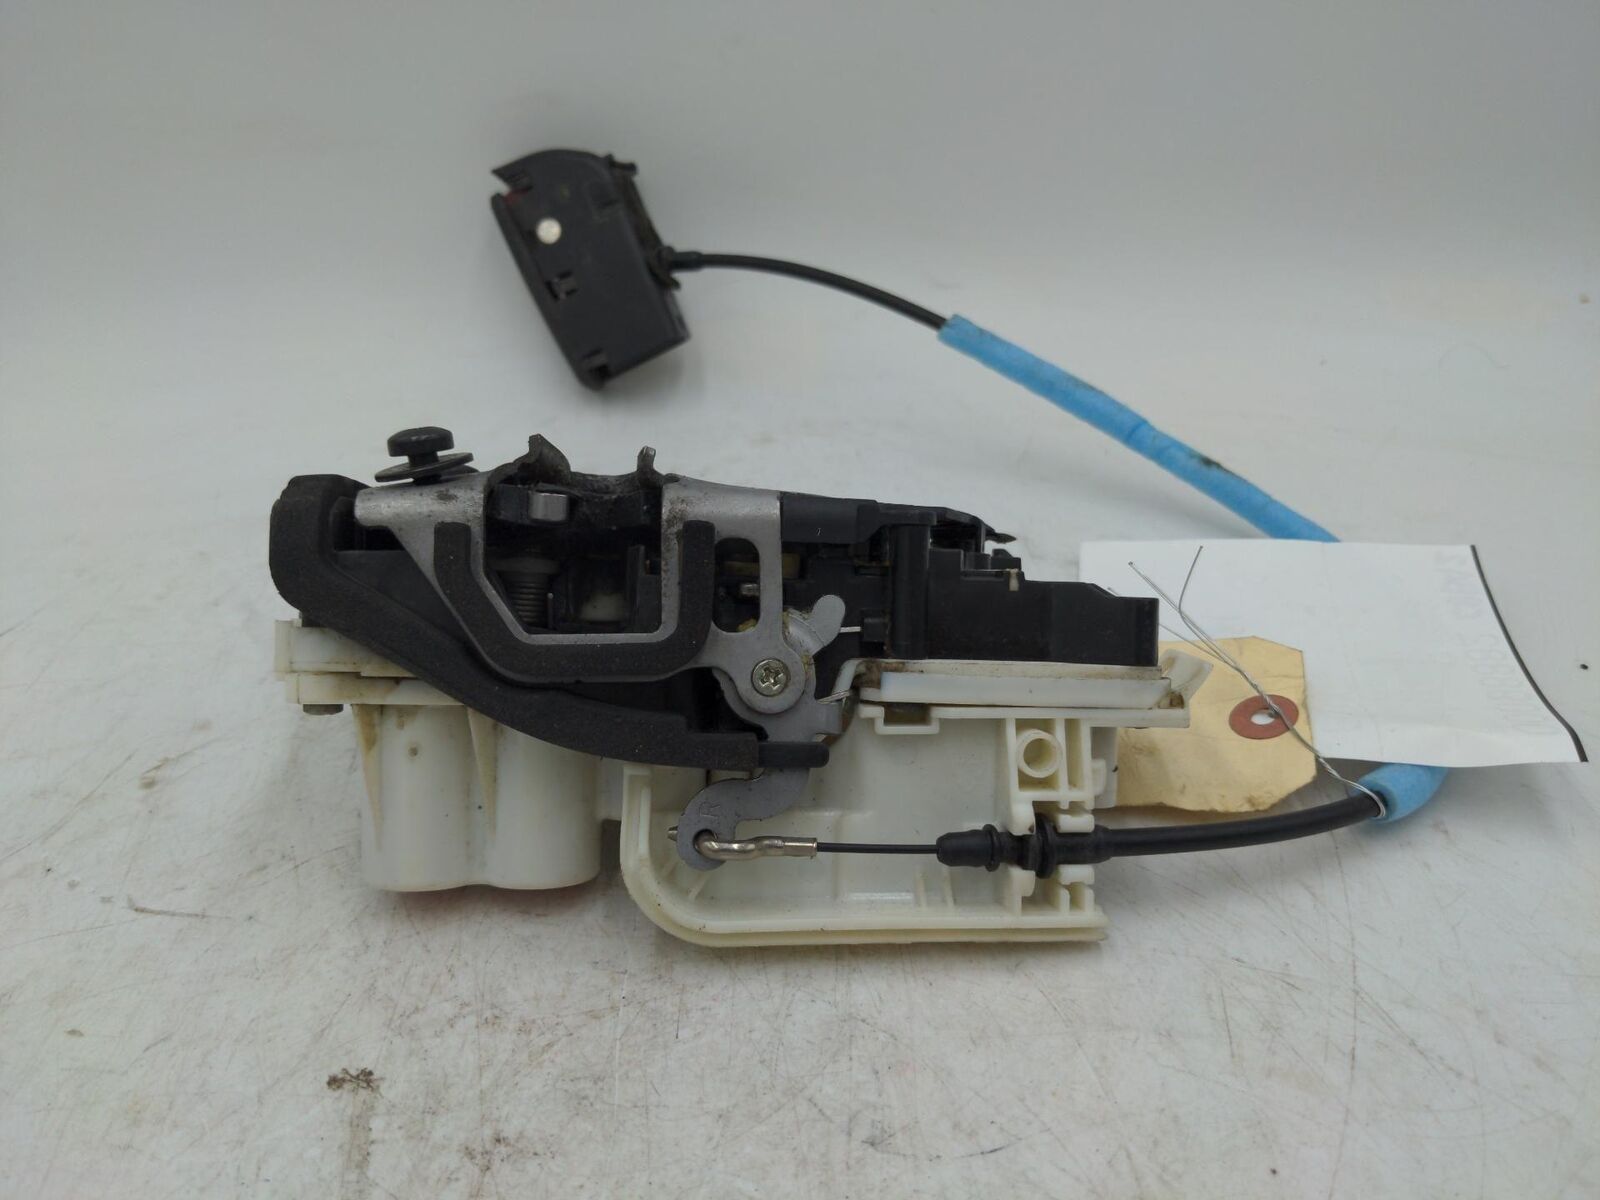 14-17 BMW I8 FRONT RH Right Door Latch 51417359444 A046879 42KM'S